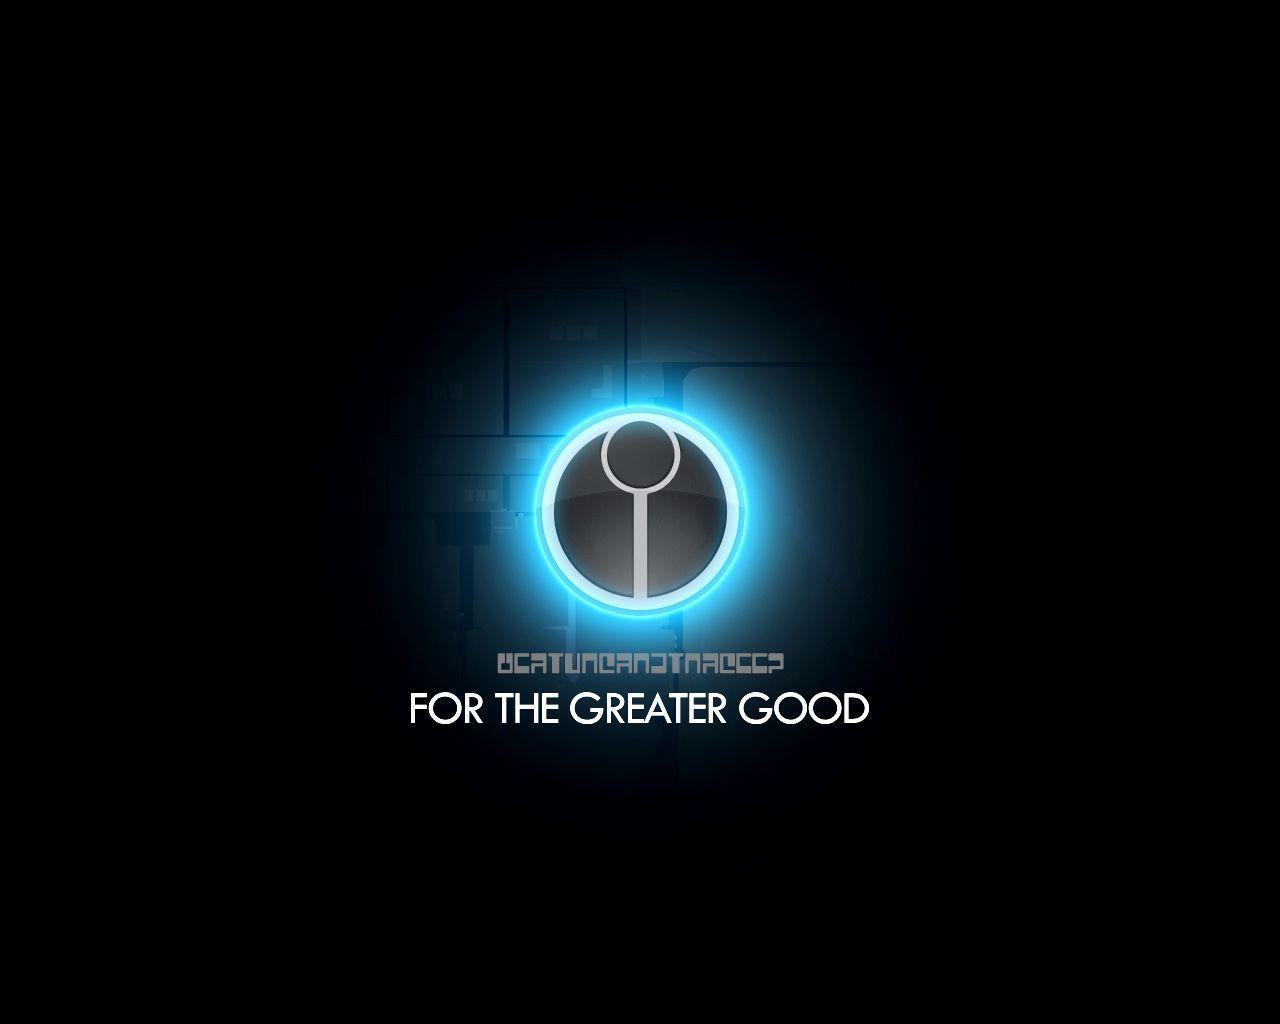 Tau For The Greater Good Wallpaper 1280x1024 px Free Download